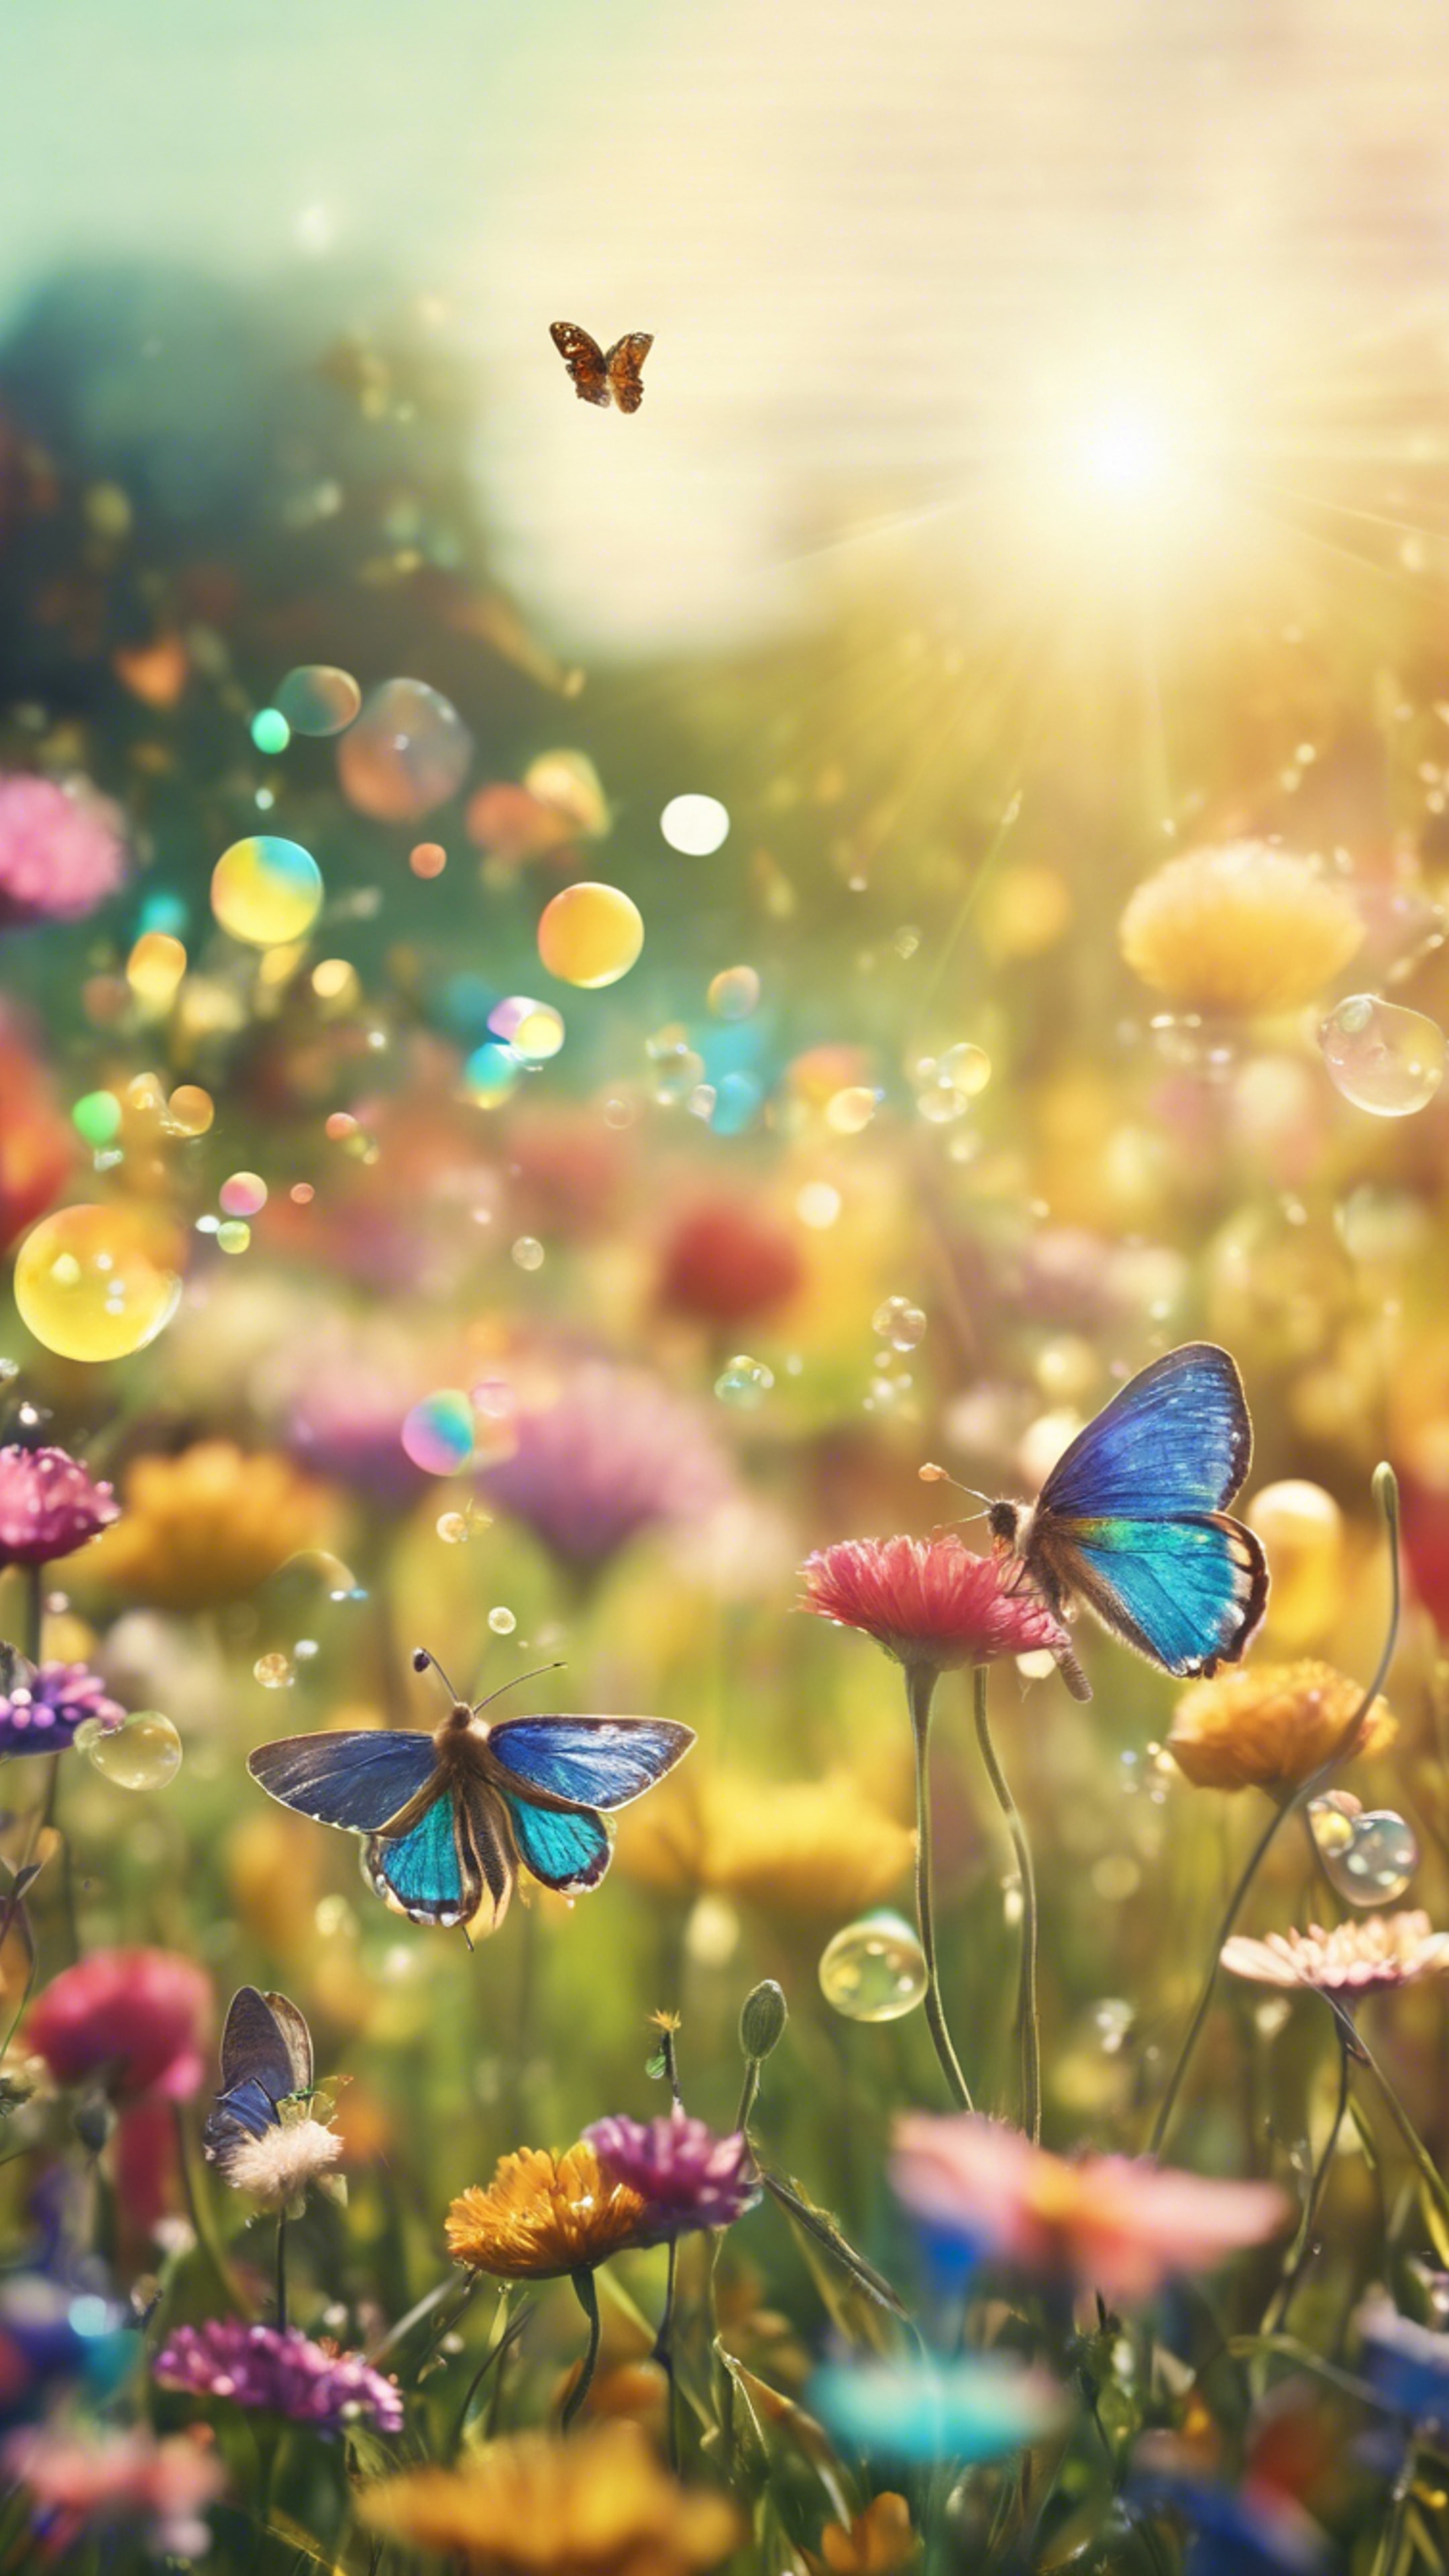 A child's dream of a playful, sunny meadow filled with rainbow butterflies and bubble-blowing bumblebees. Валлпапер[6664242c62b24fa88676]